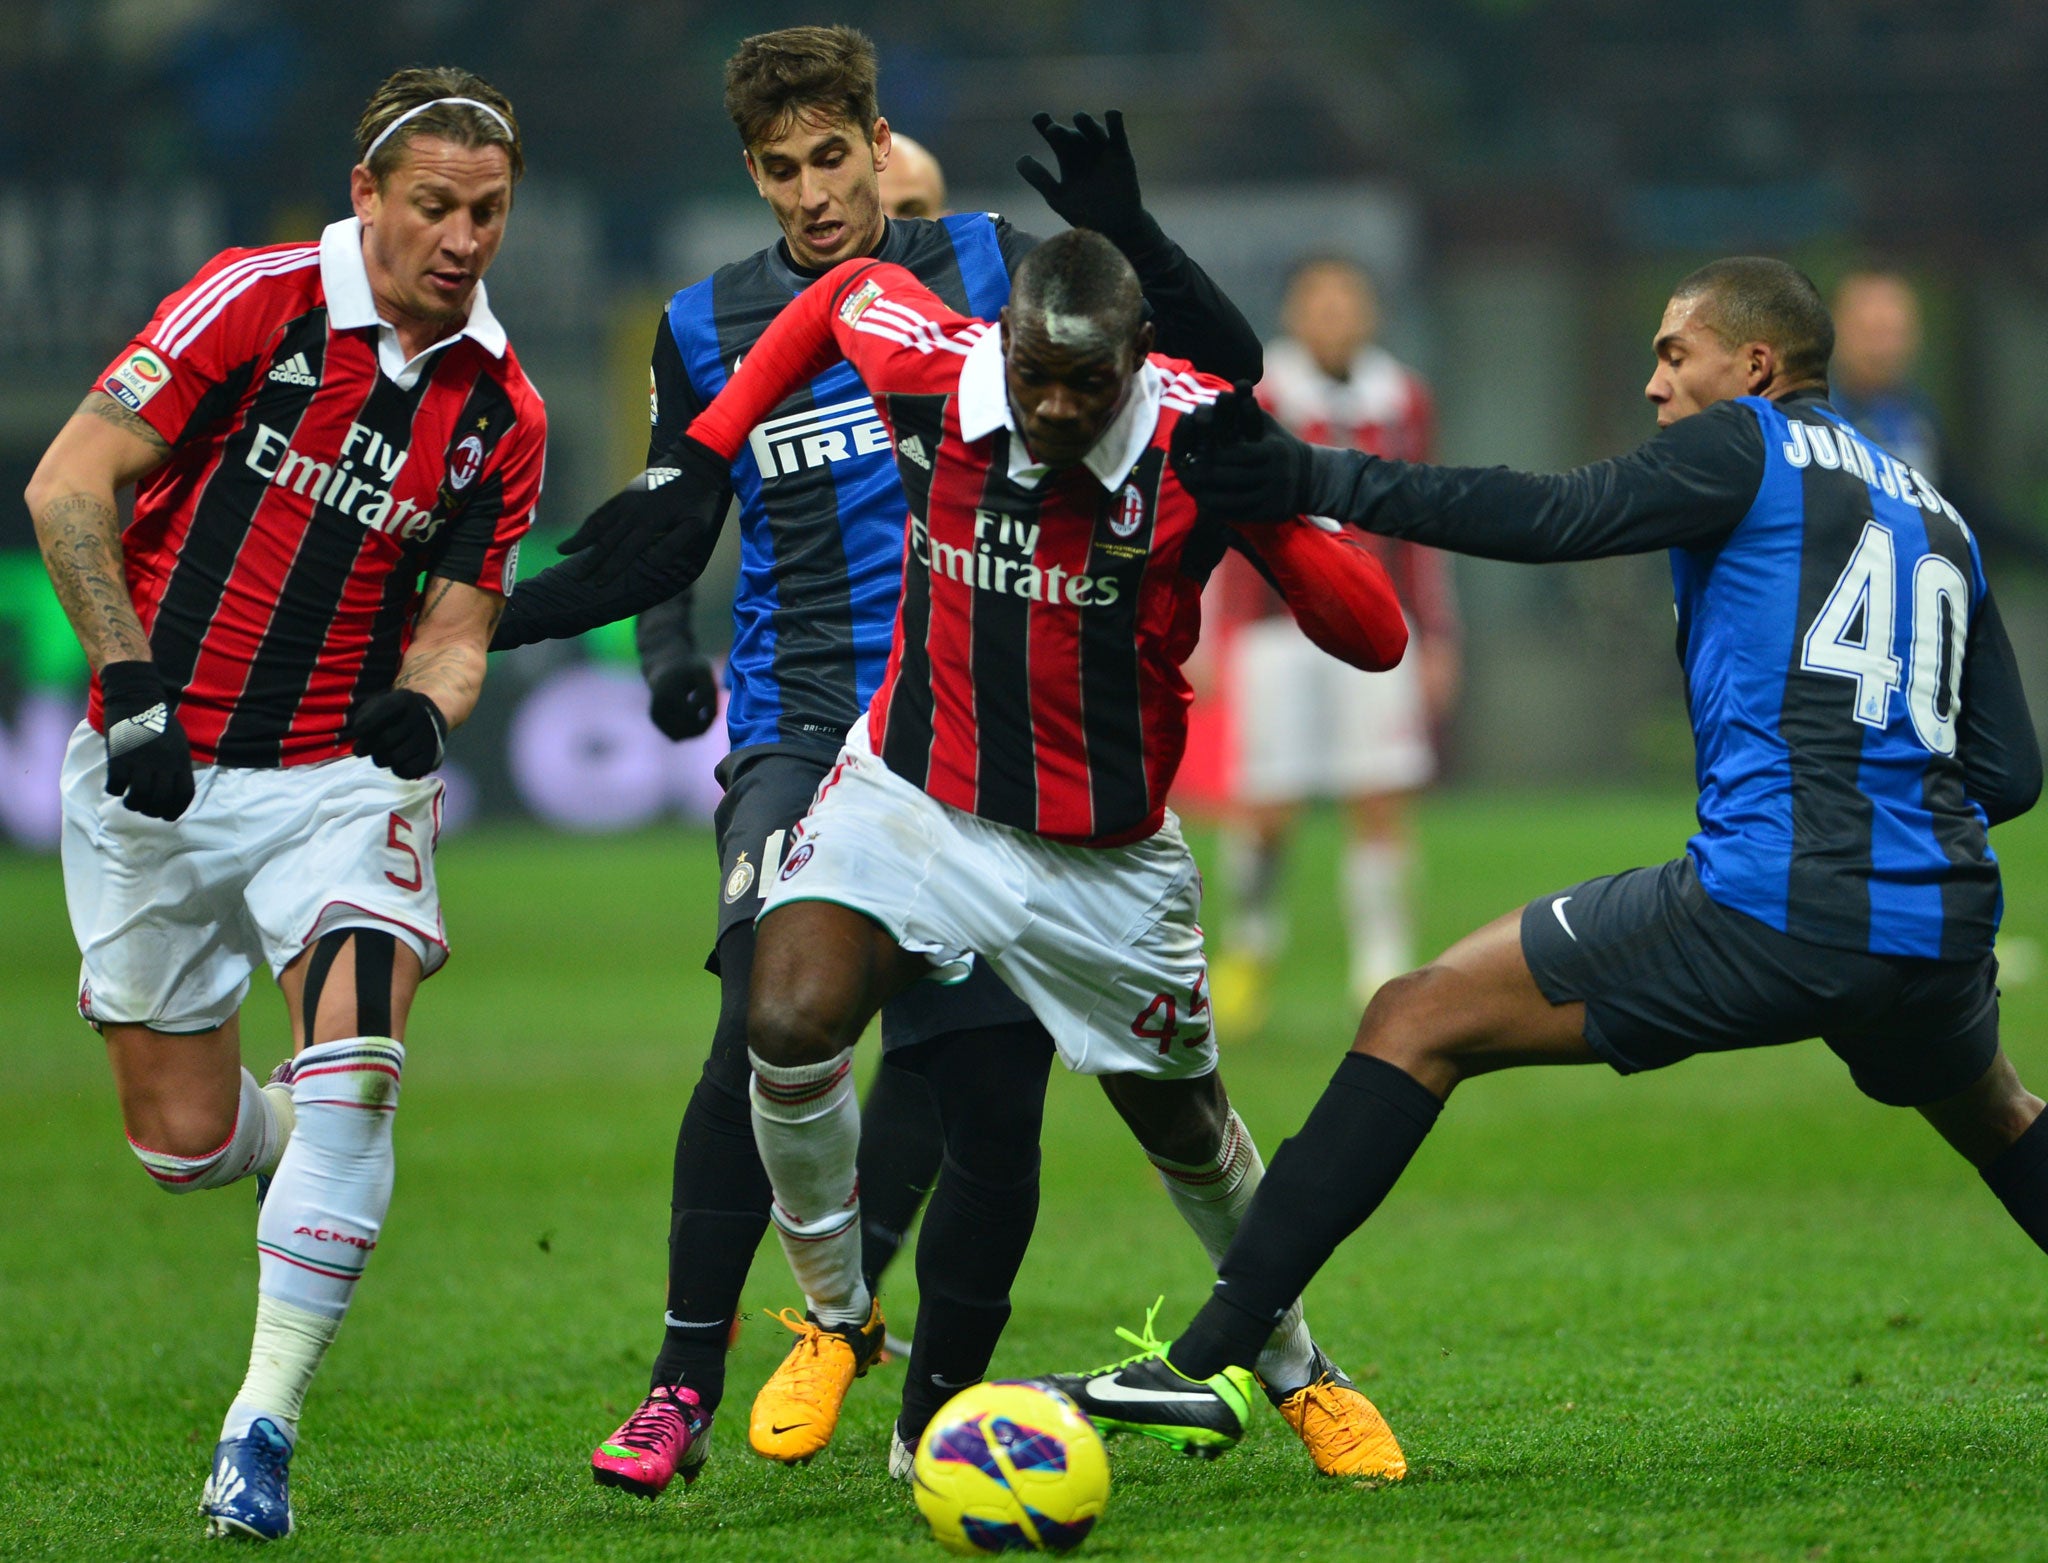 Balotelli scored 30 goals in 54 matches for AC Milan